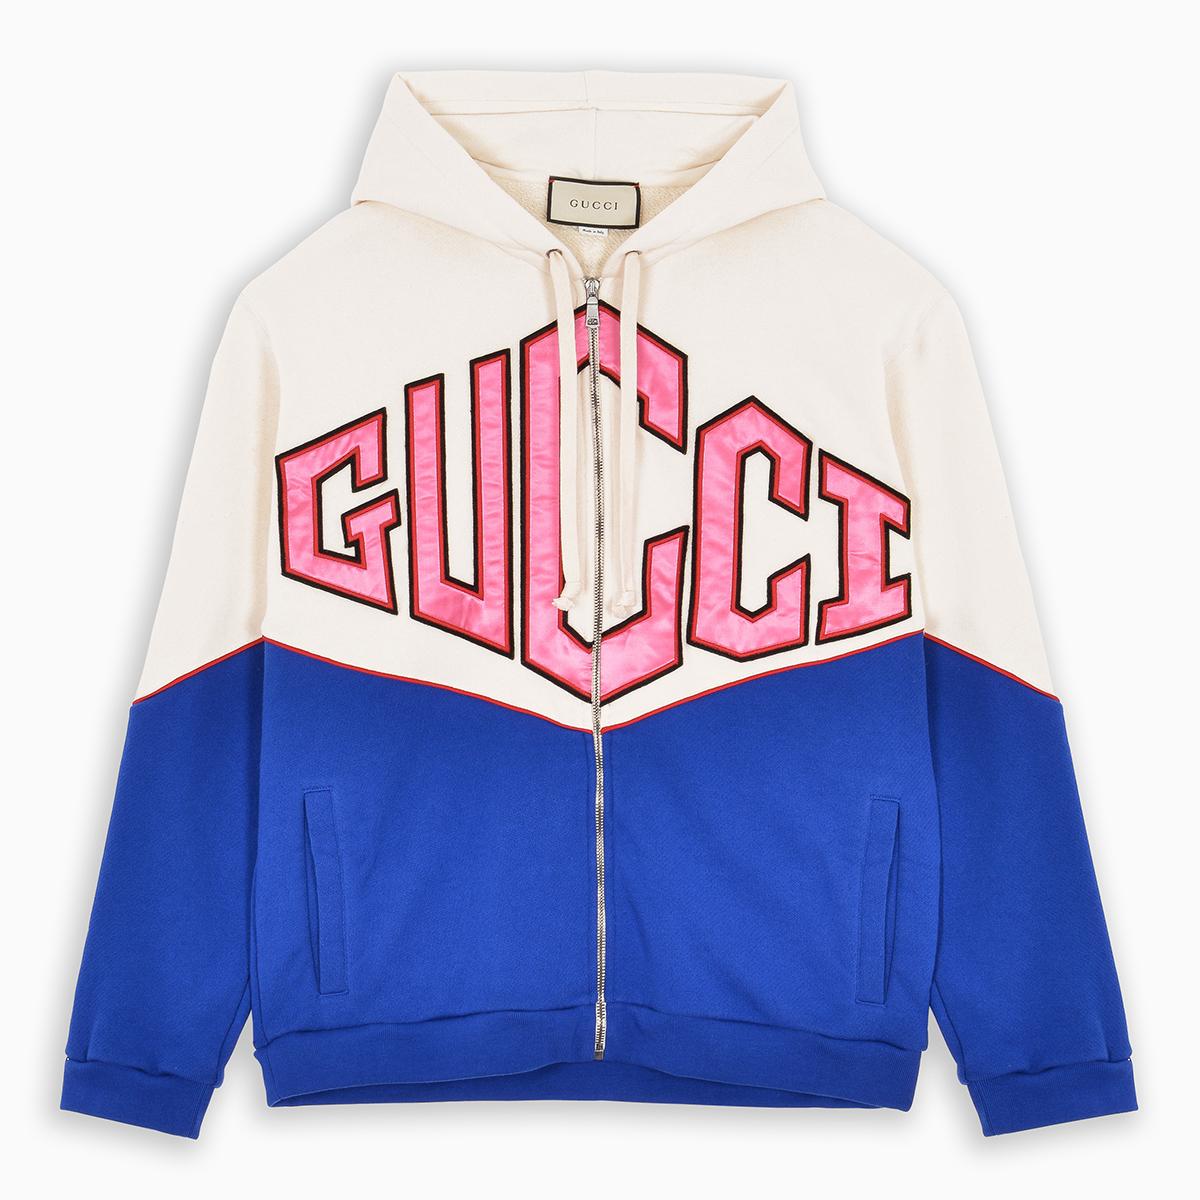 Gucci Cotton Game Sweatshirt in Natural/Navy/Red (Blue) for Men - Lyst